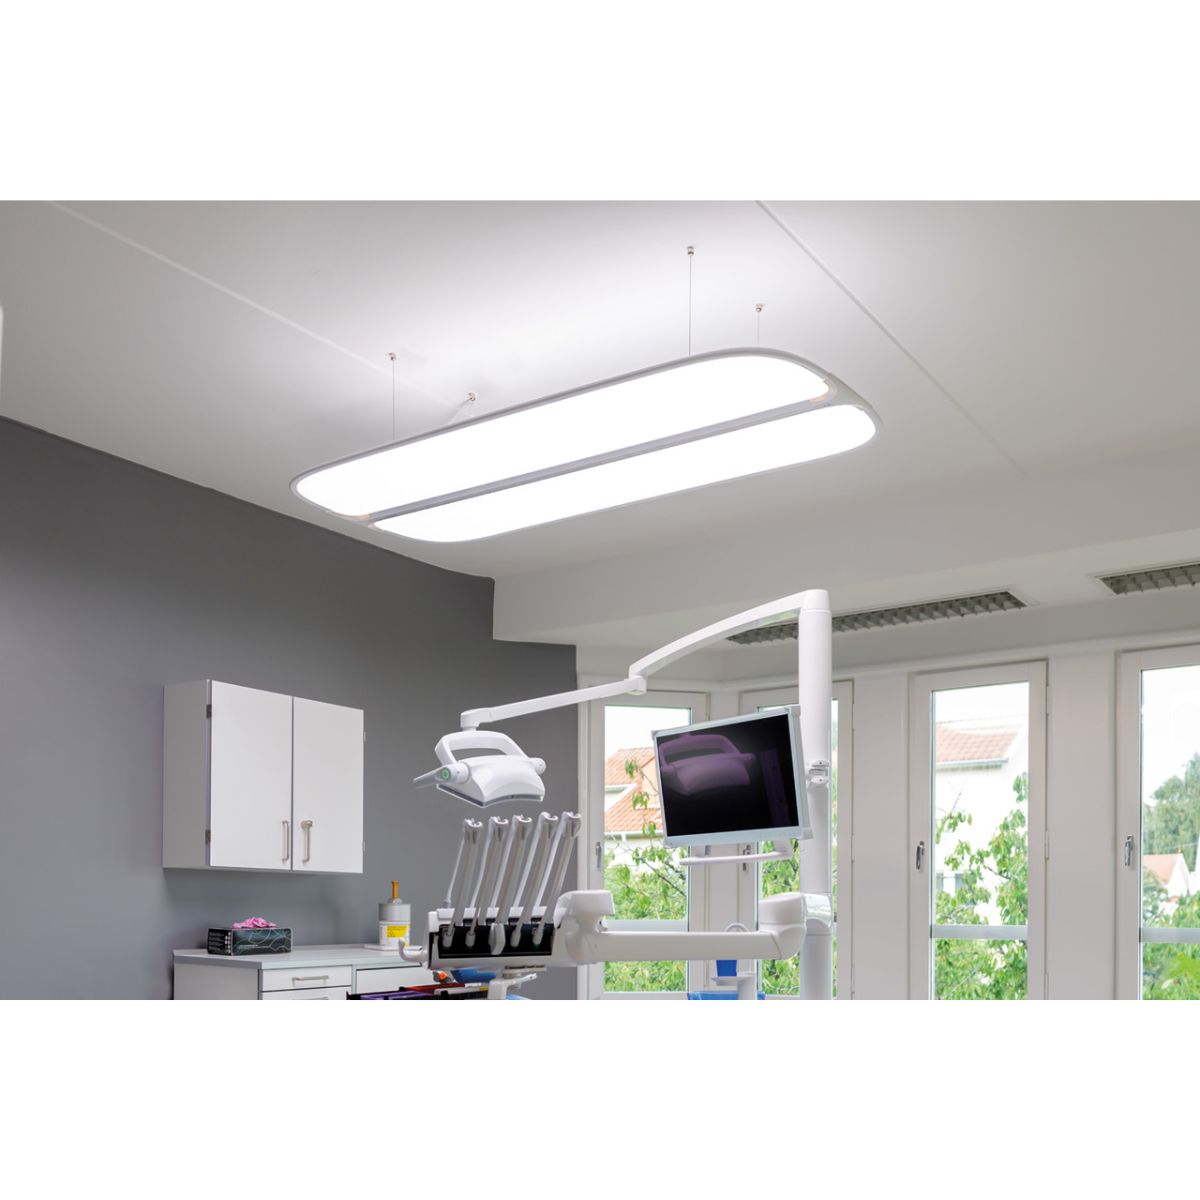 D-Tec LED Surgery Light with Dimmer and Remote Clair CL104 (9128227504438)